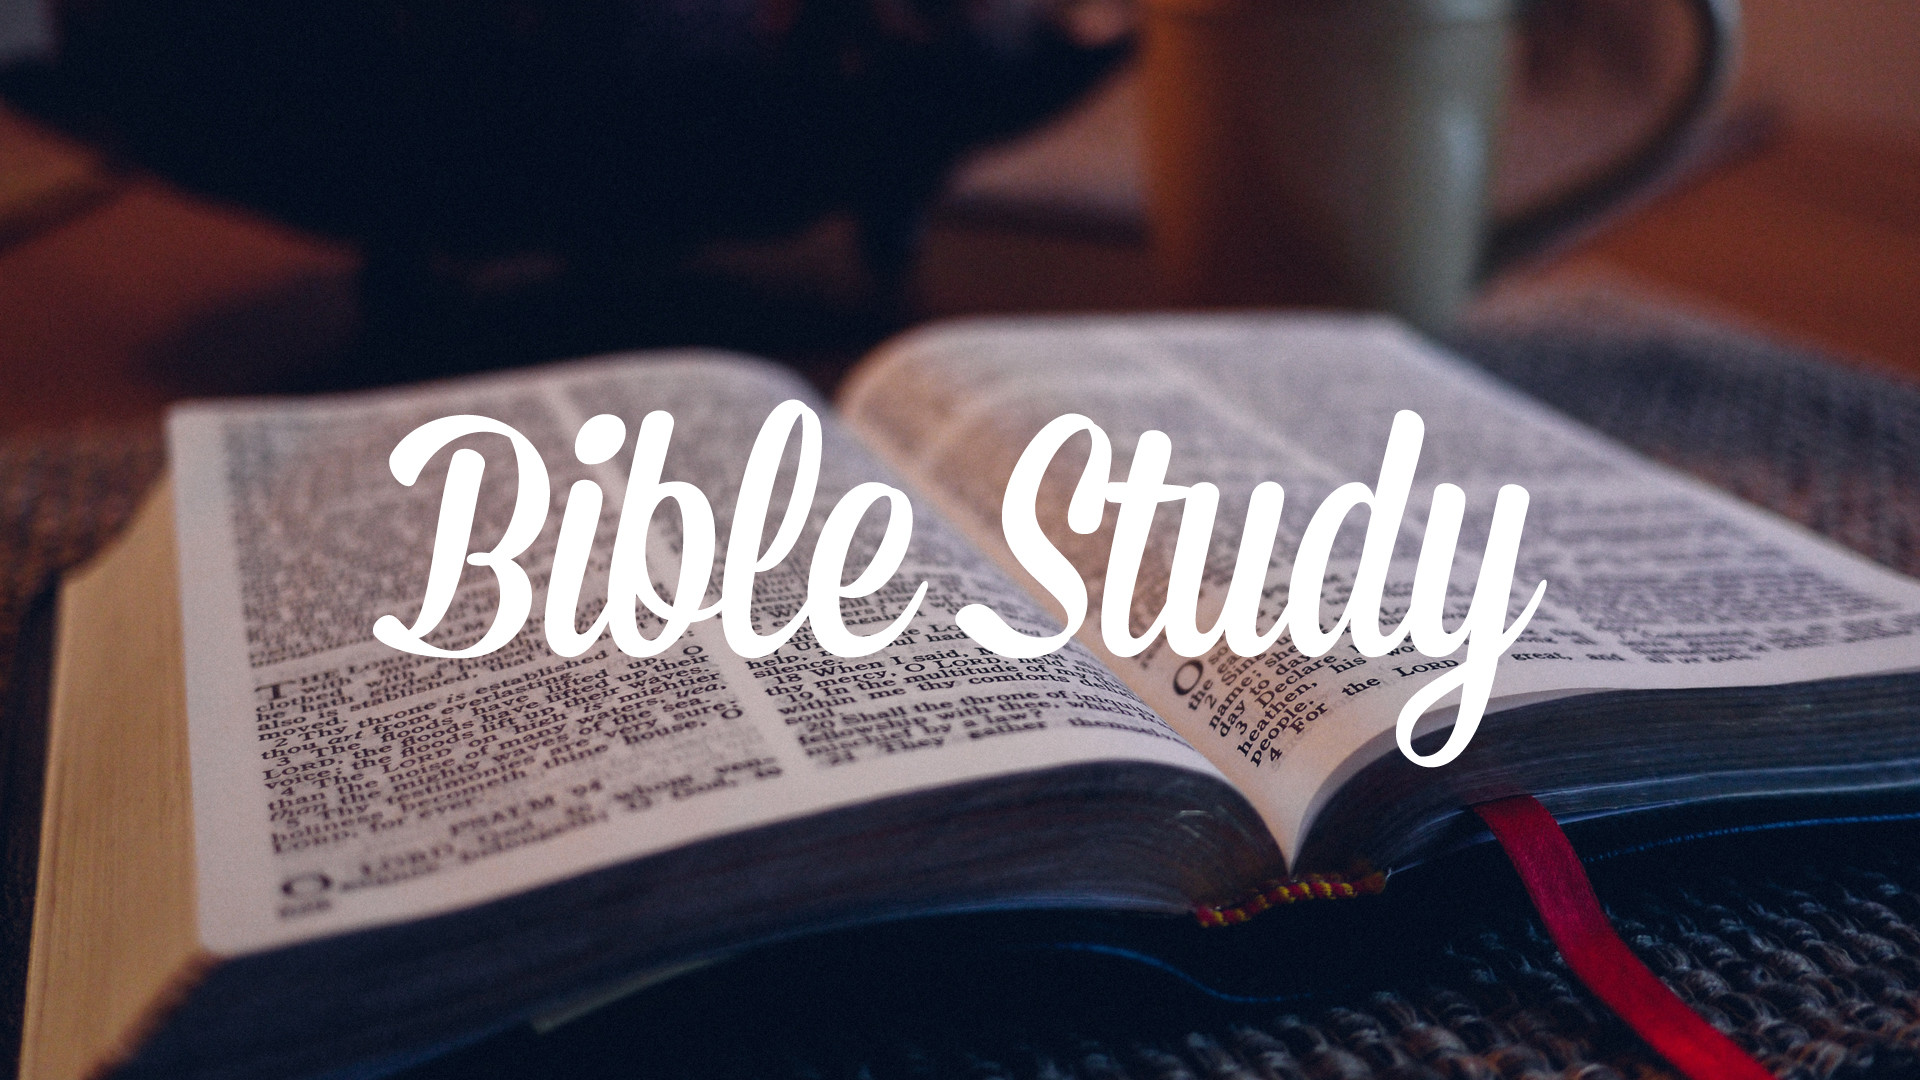 1920x1080 Join us this New Year for Bible Study!